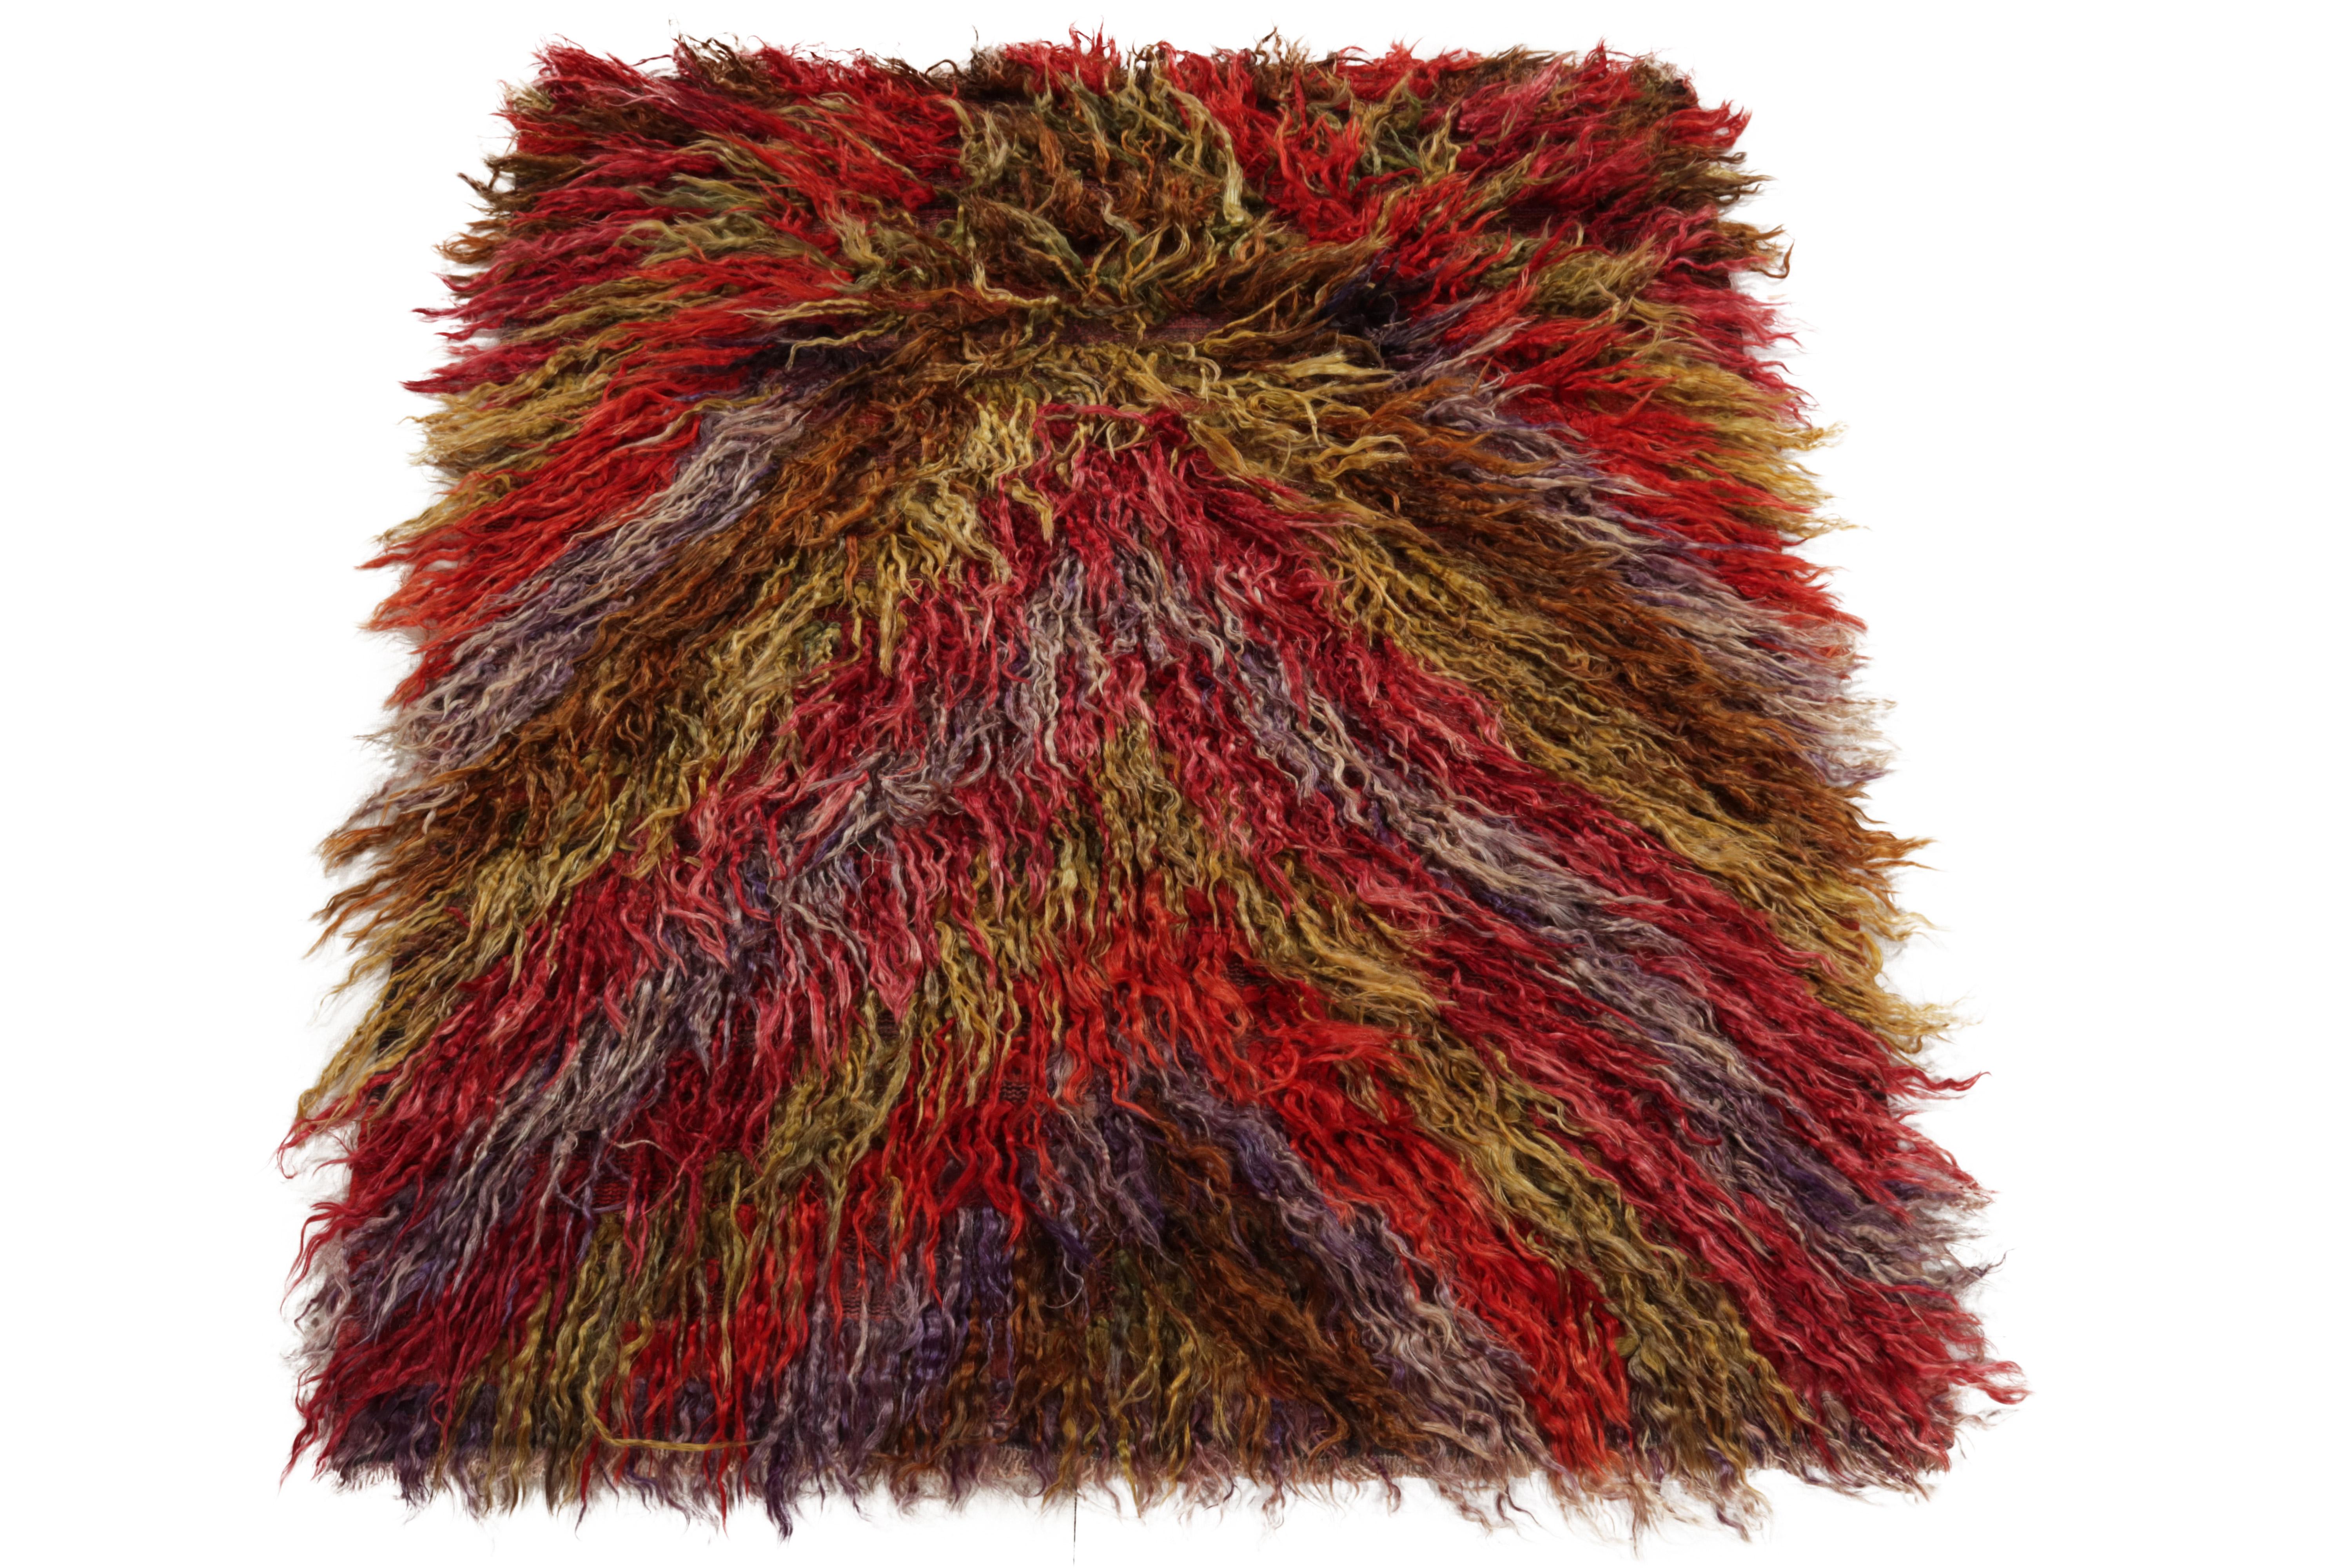 From Rug & Kilim’s tribal selections, a hand-knotted vintage Tulu rug carrying a luscious high pile. Originating from Turkey circa 1950-1960, the rug enjoys a geometric pattern in hues of red, brown & ink blue further complementing the shaggy